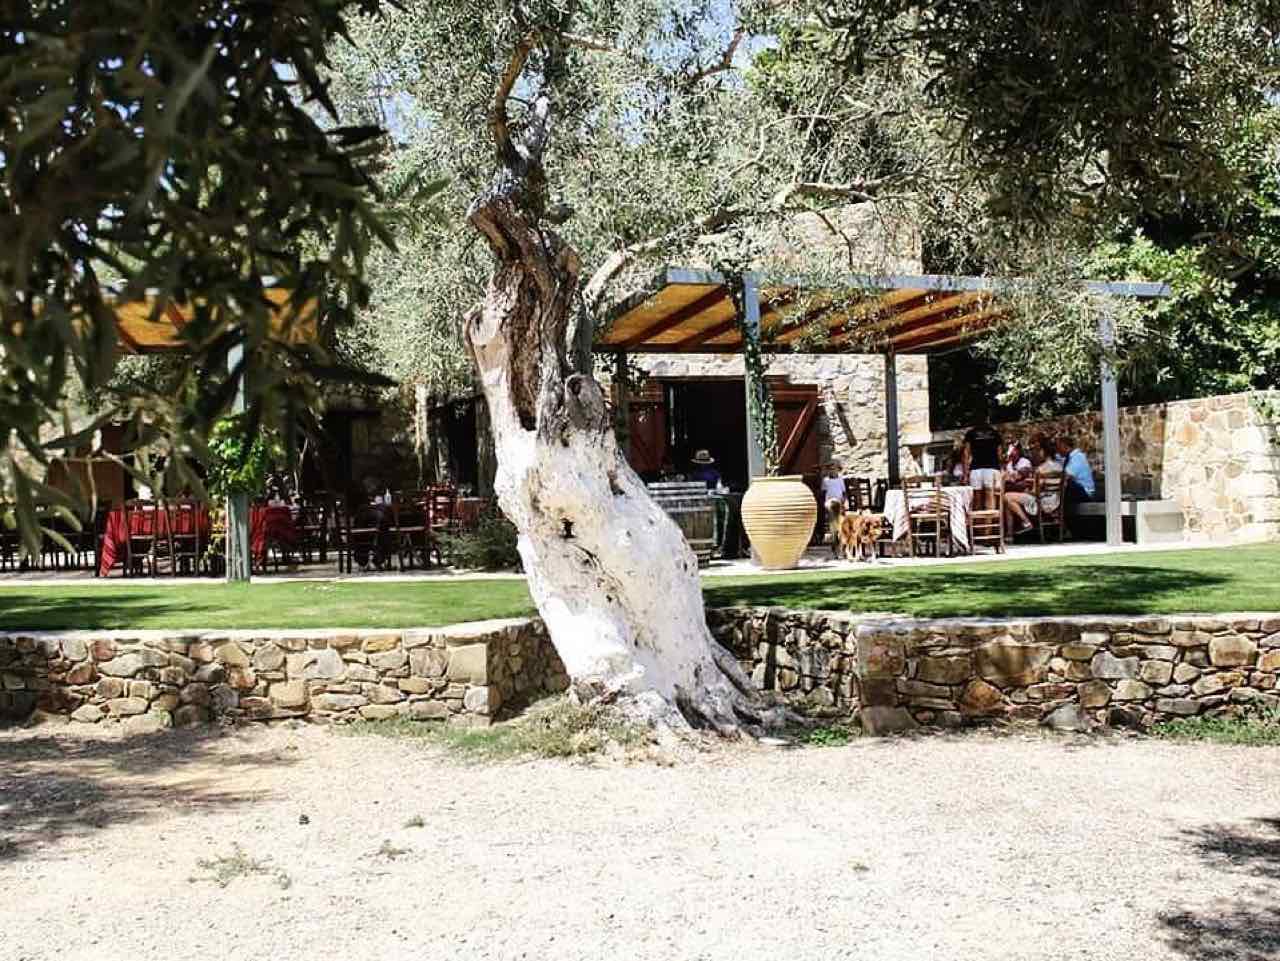 winery tours, wine tasting manousakis winery chania crete, winery visit manousakis winery, bio organic wine chania crete, vineyard tours, bio wine food tasting chania crete, best organic winey crete greece, Organic, boutique winery handcrafted wine, nostos wines chania crete